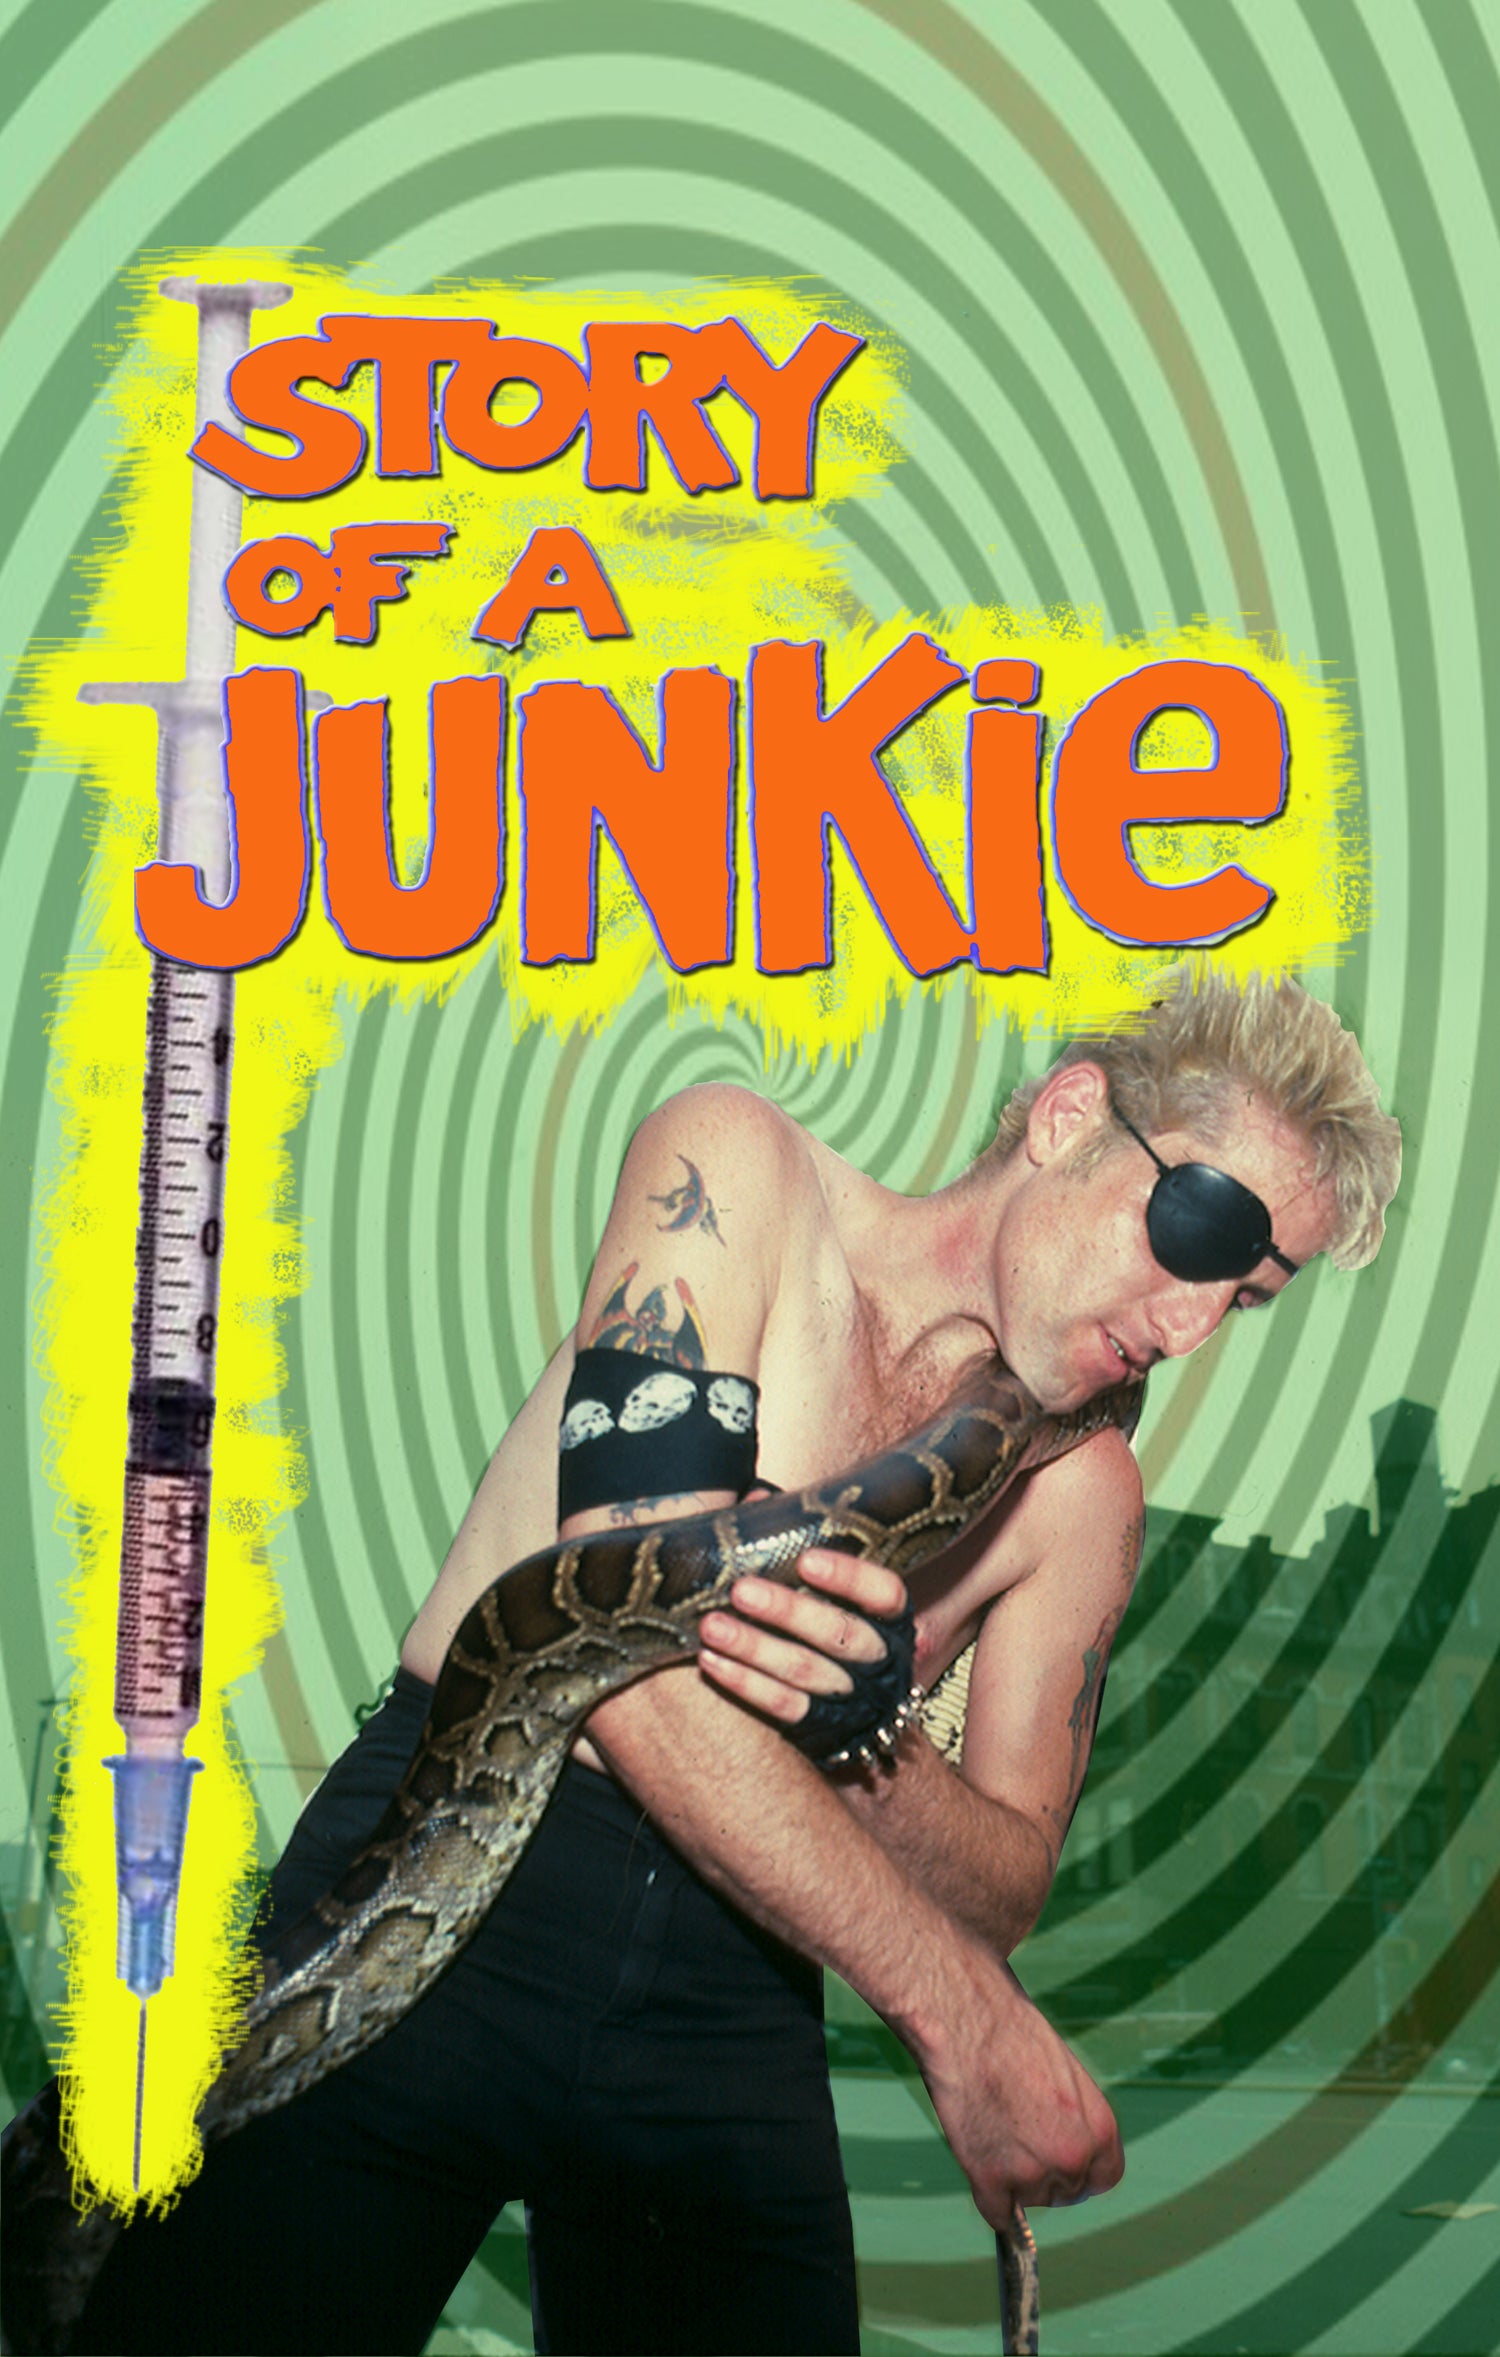 STORY OF A JUNKIE DVD